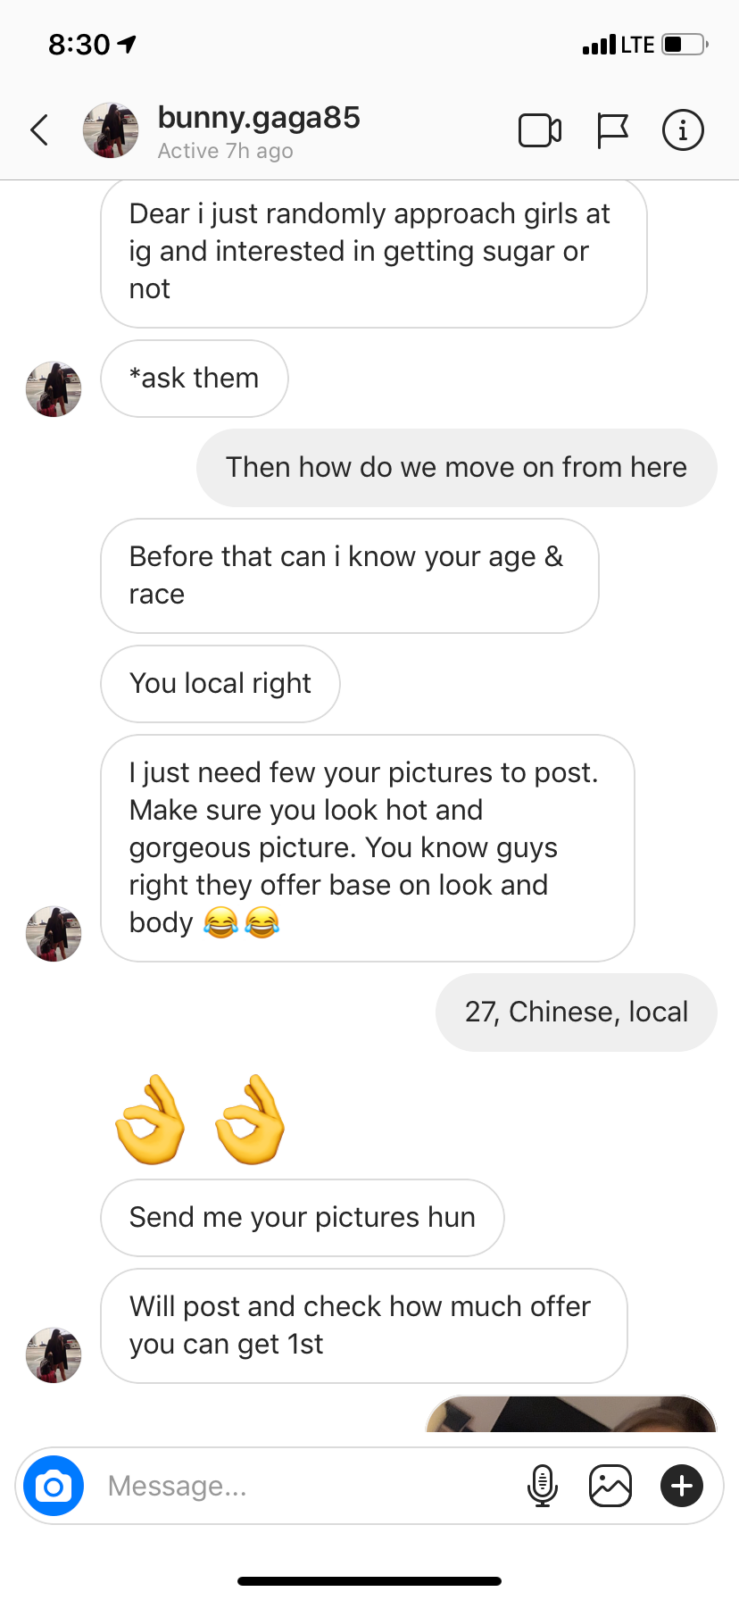 A Sugar Daddy Agent Messaged Me on Instagram and Said I Could Earn RM40,000 A Month - WORLD OF BUZZ 8